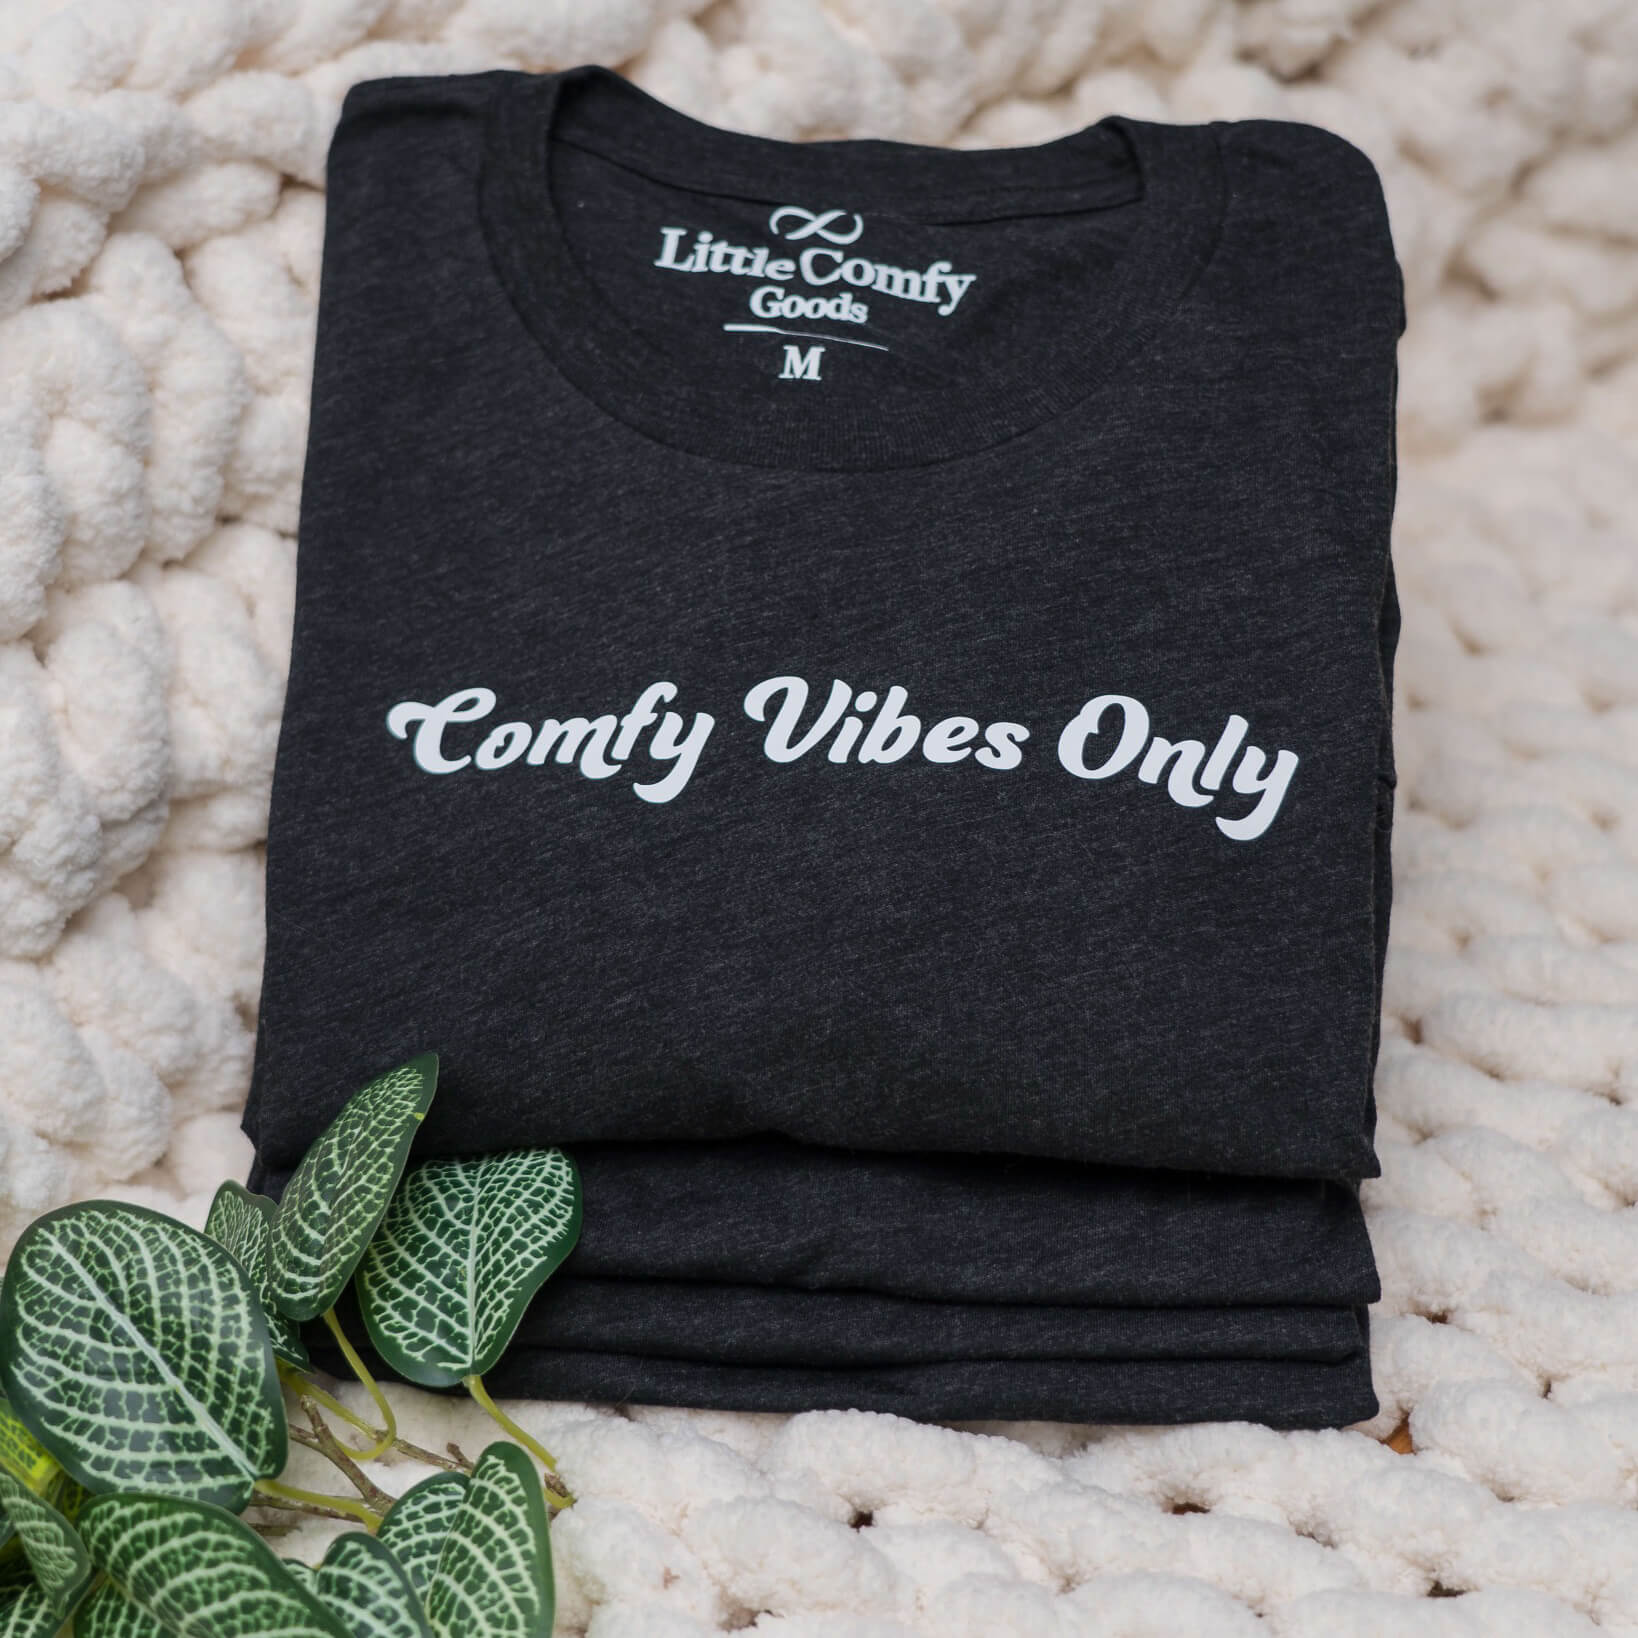 Comfy Vibes Only T-Shirt